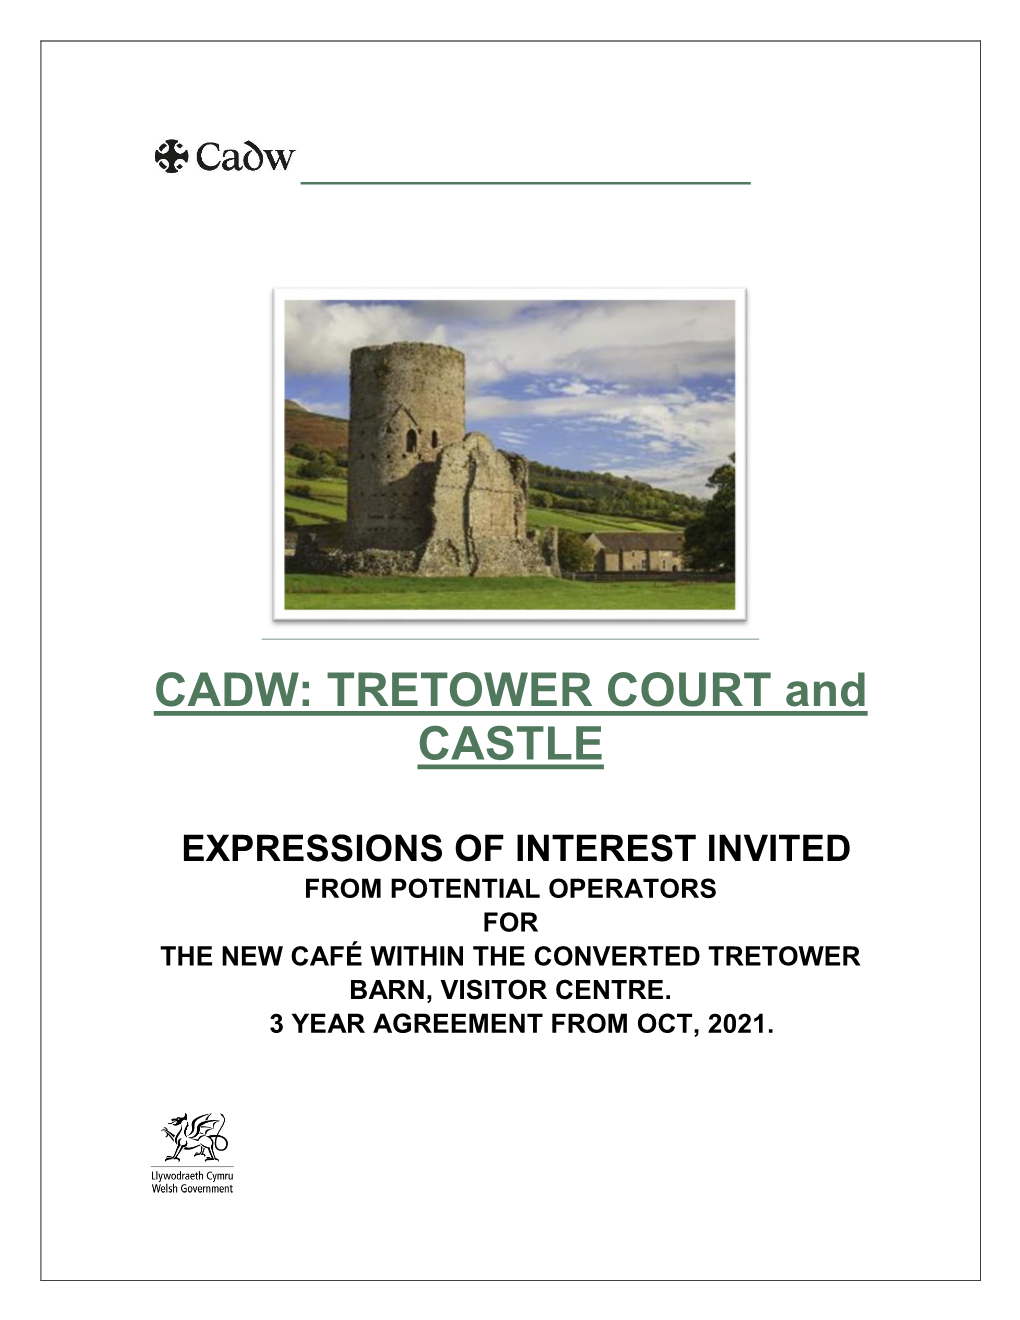 TRETOWER COURT and CASTLE